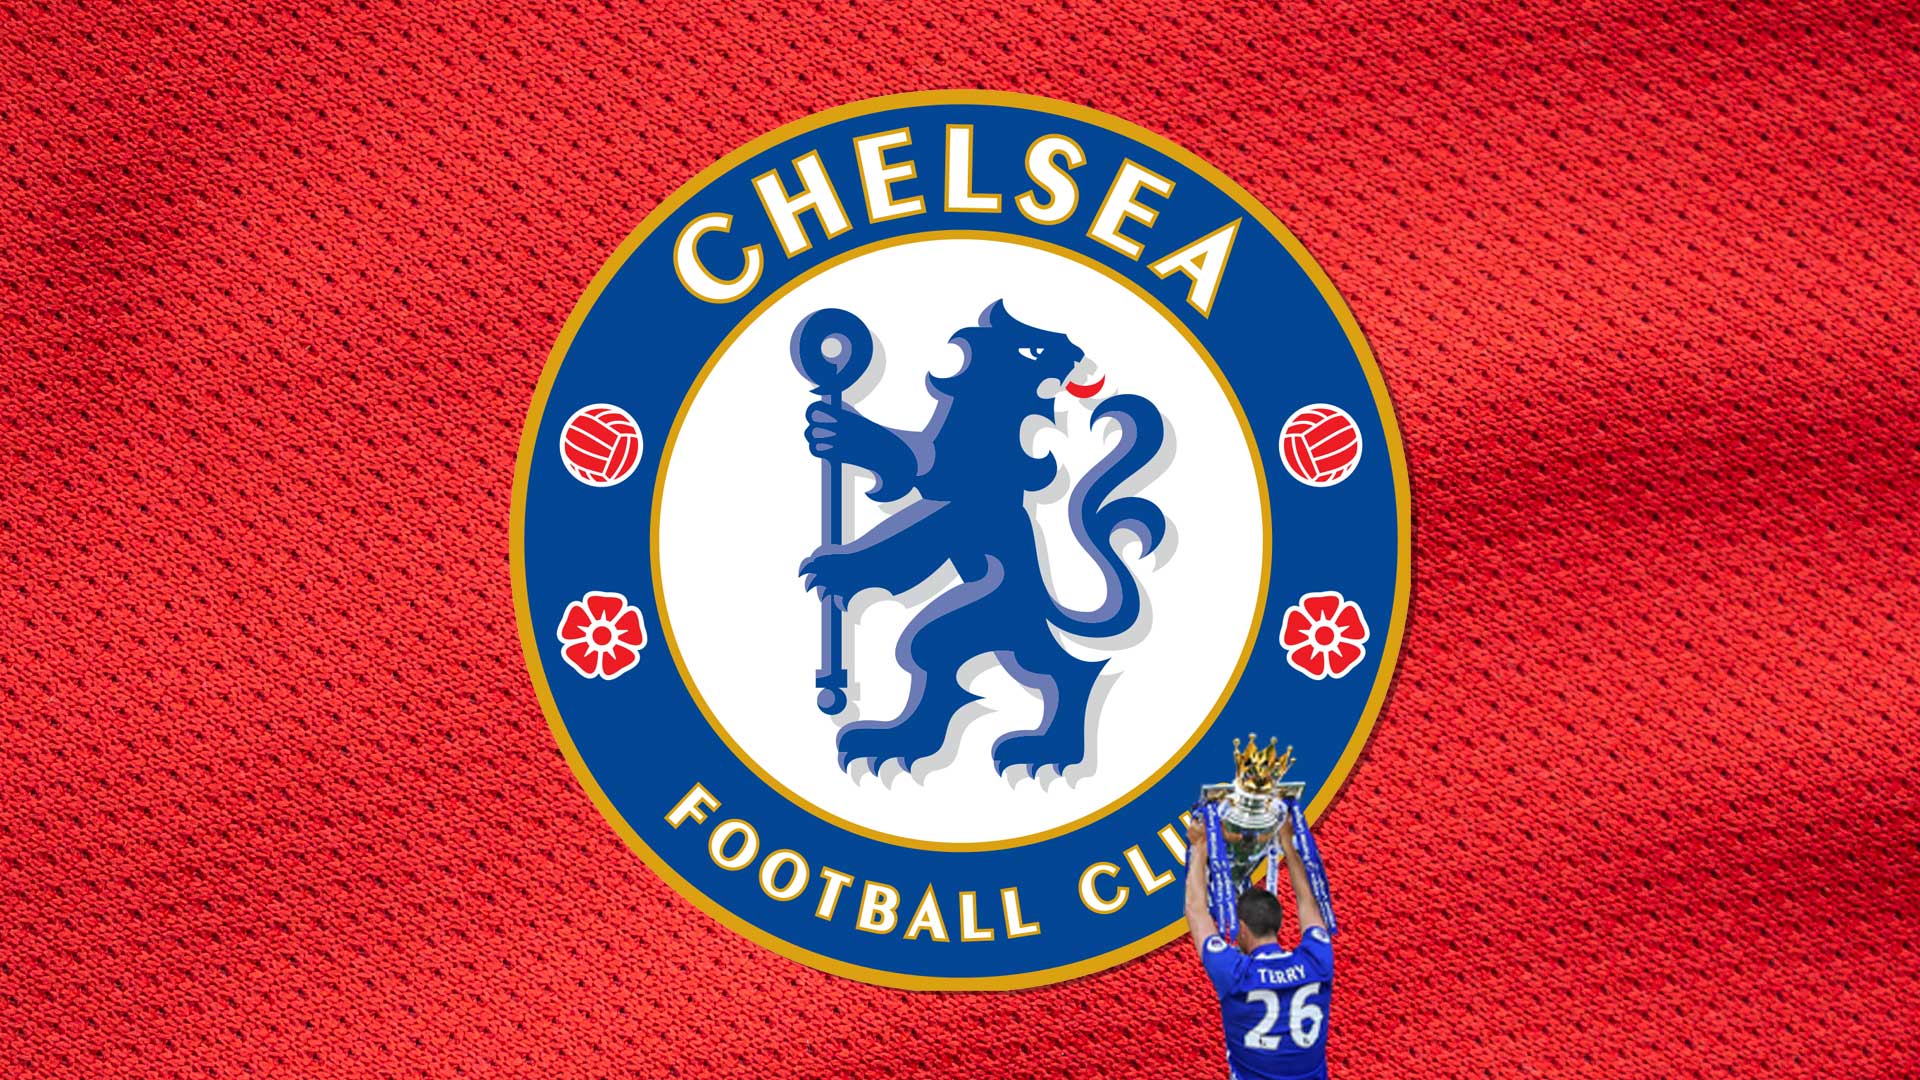 Chelsea badge on a red background